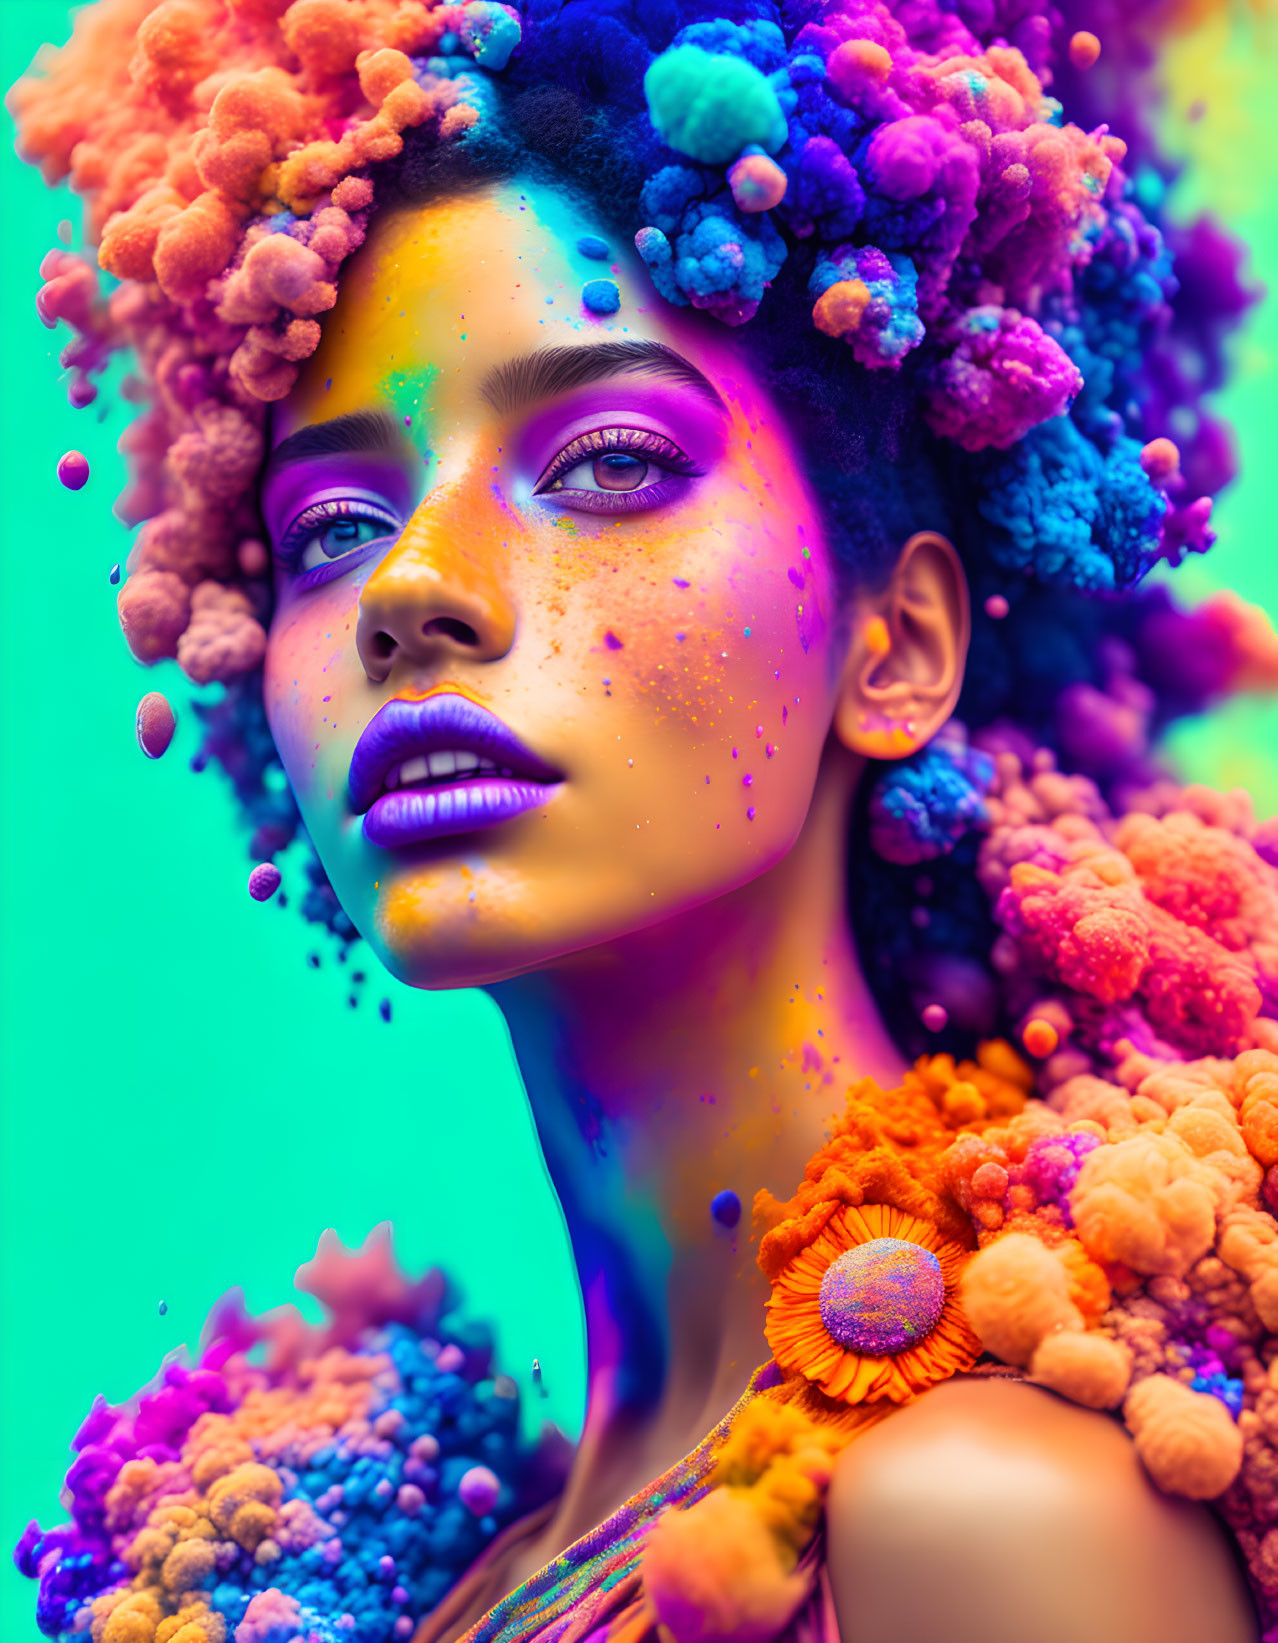 Colorful portrait of woman with pom-poms, purple eyeshadow, neon backdrop